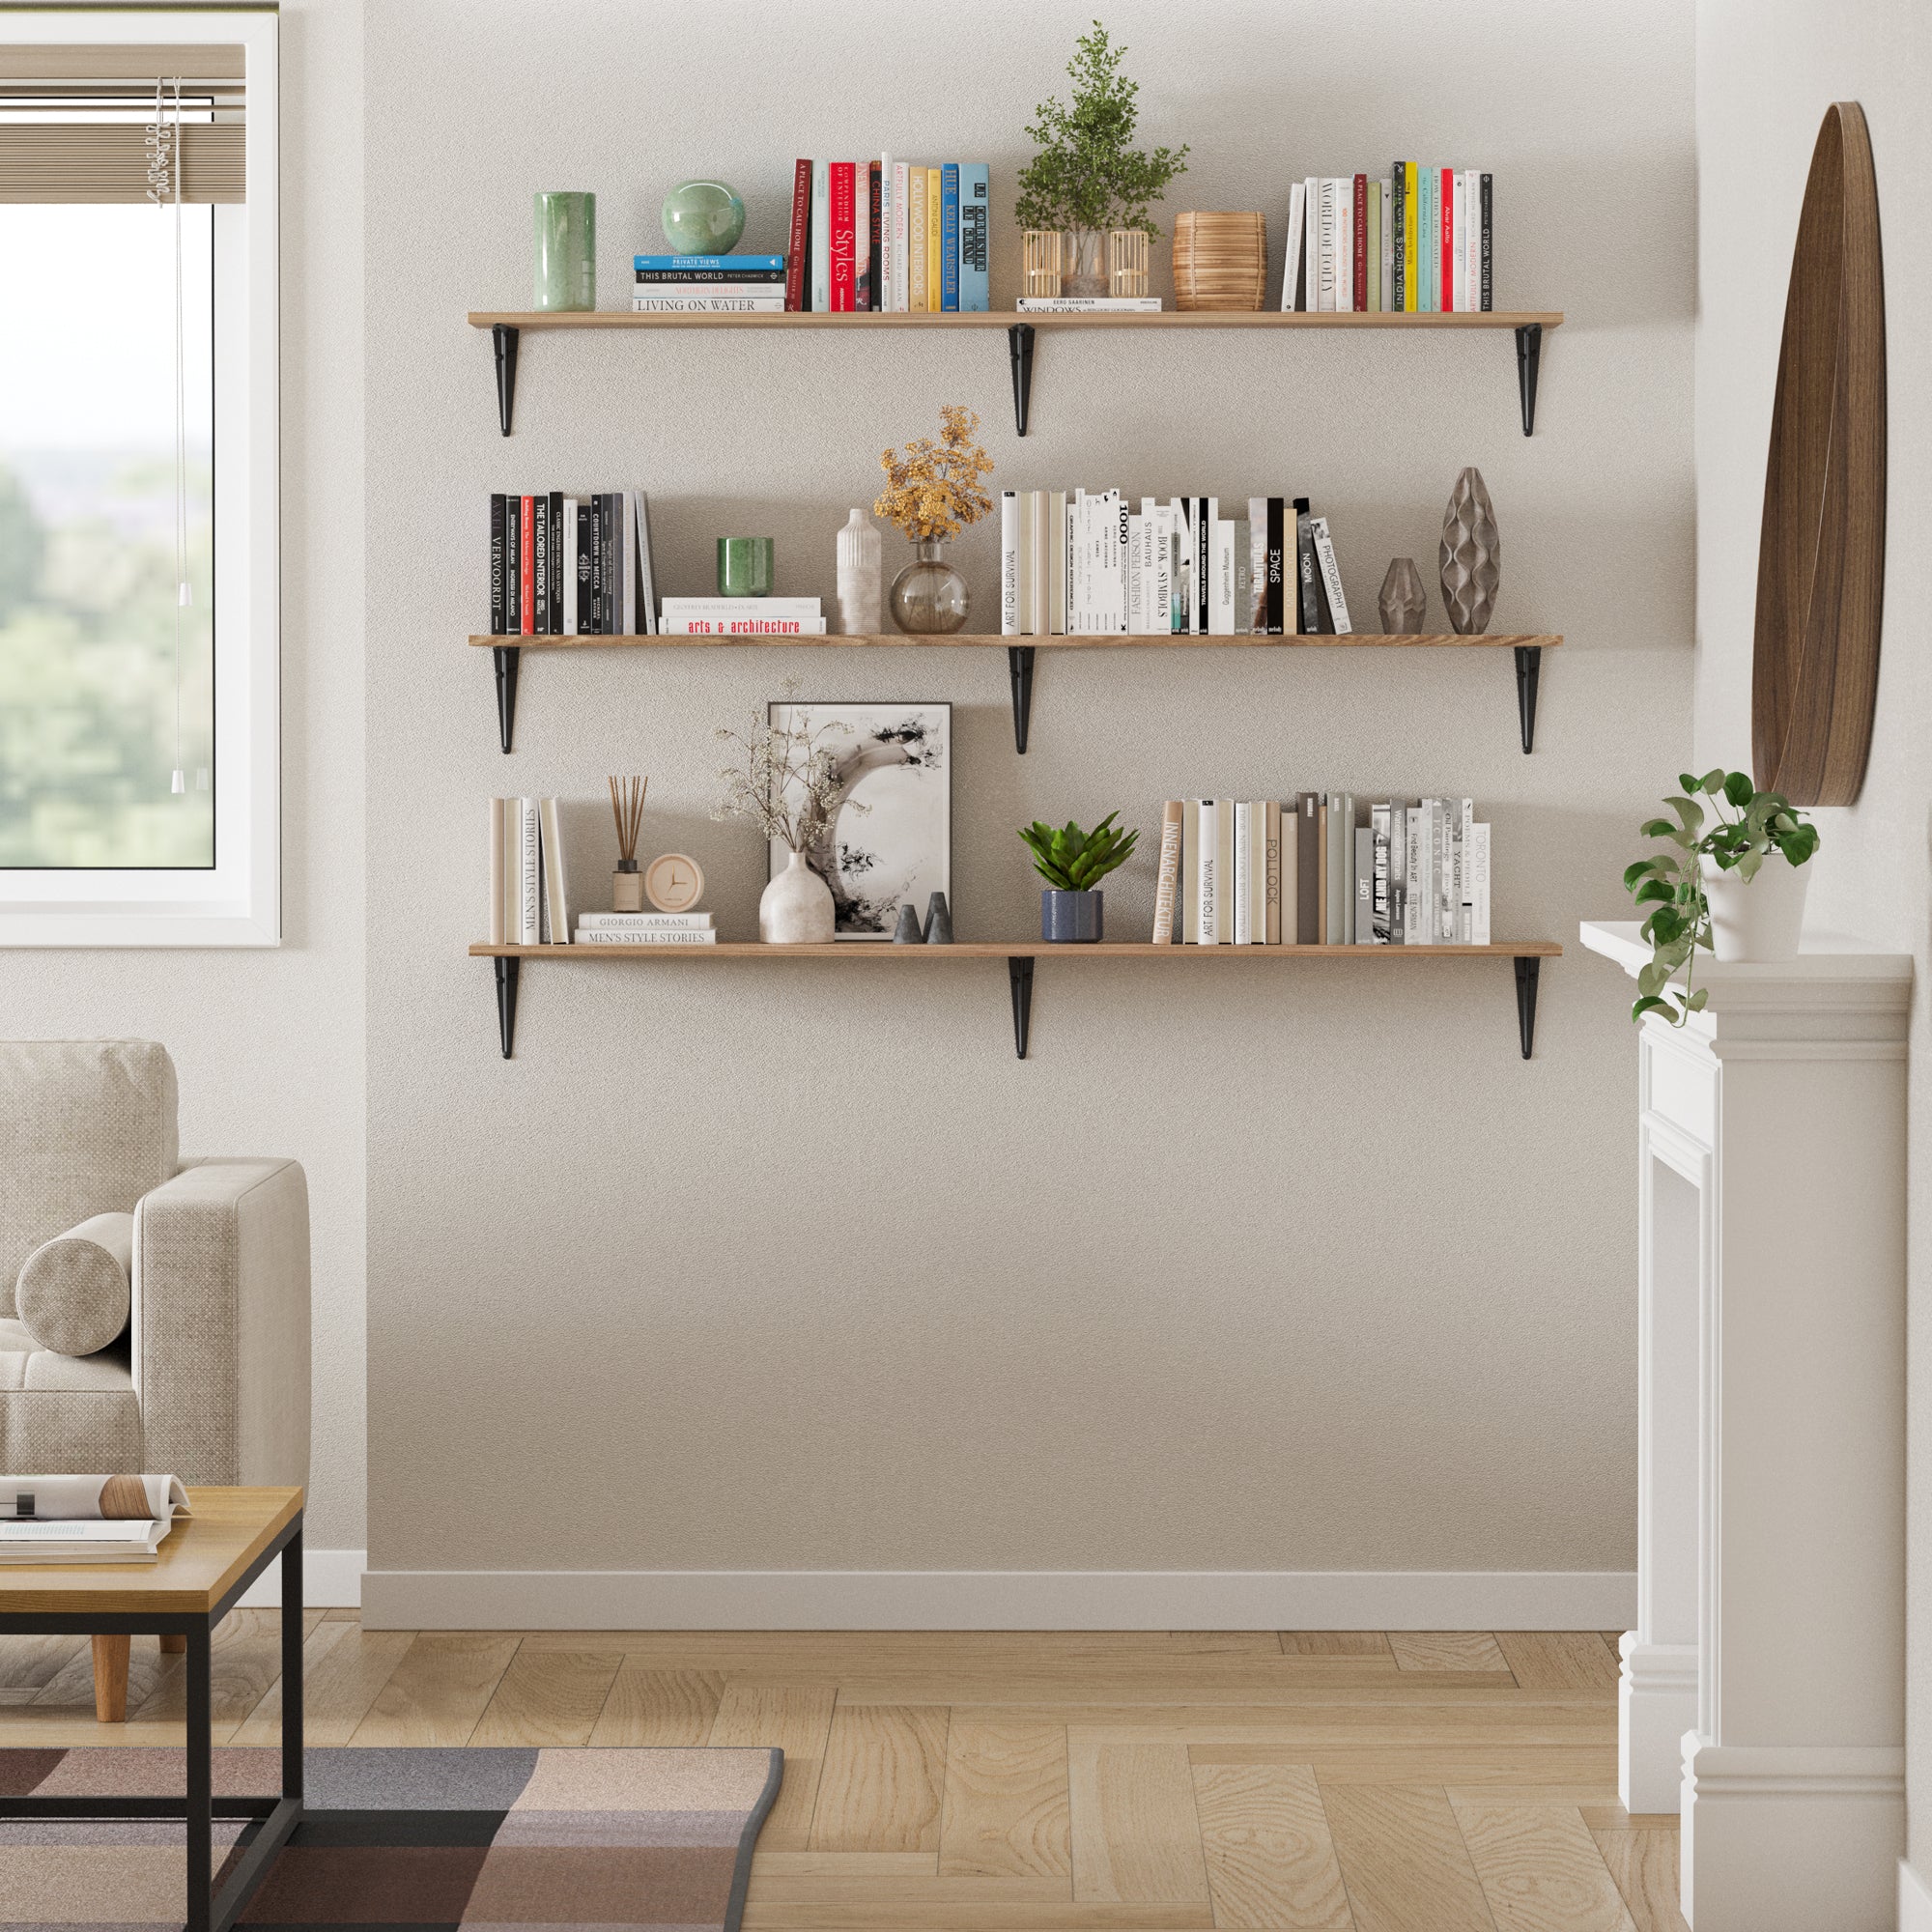 Rustic shelves with books and various decorative items in a chic living room corner, enhancing the space's elegance.